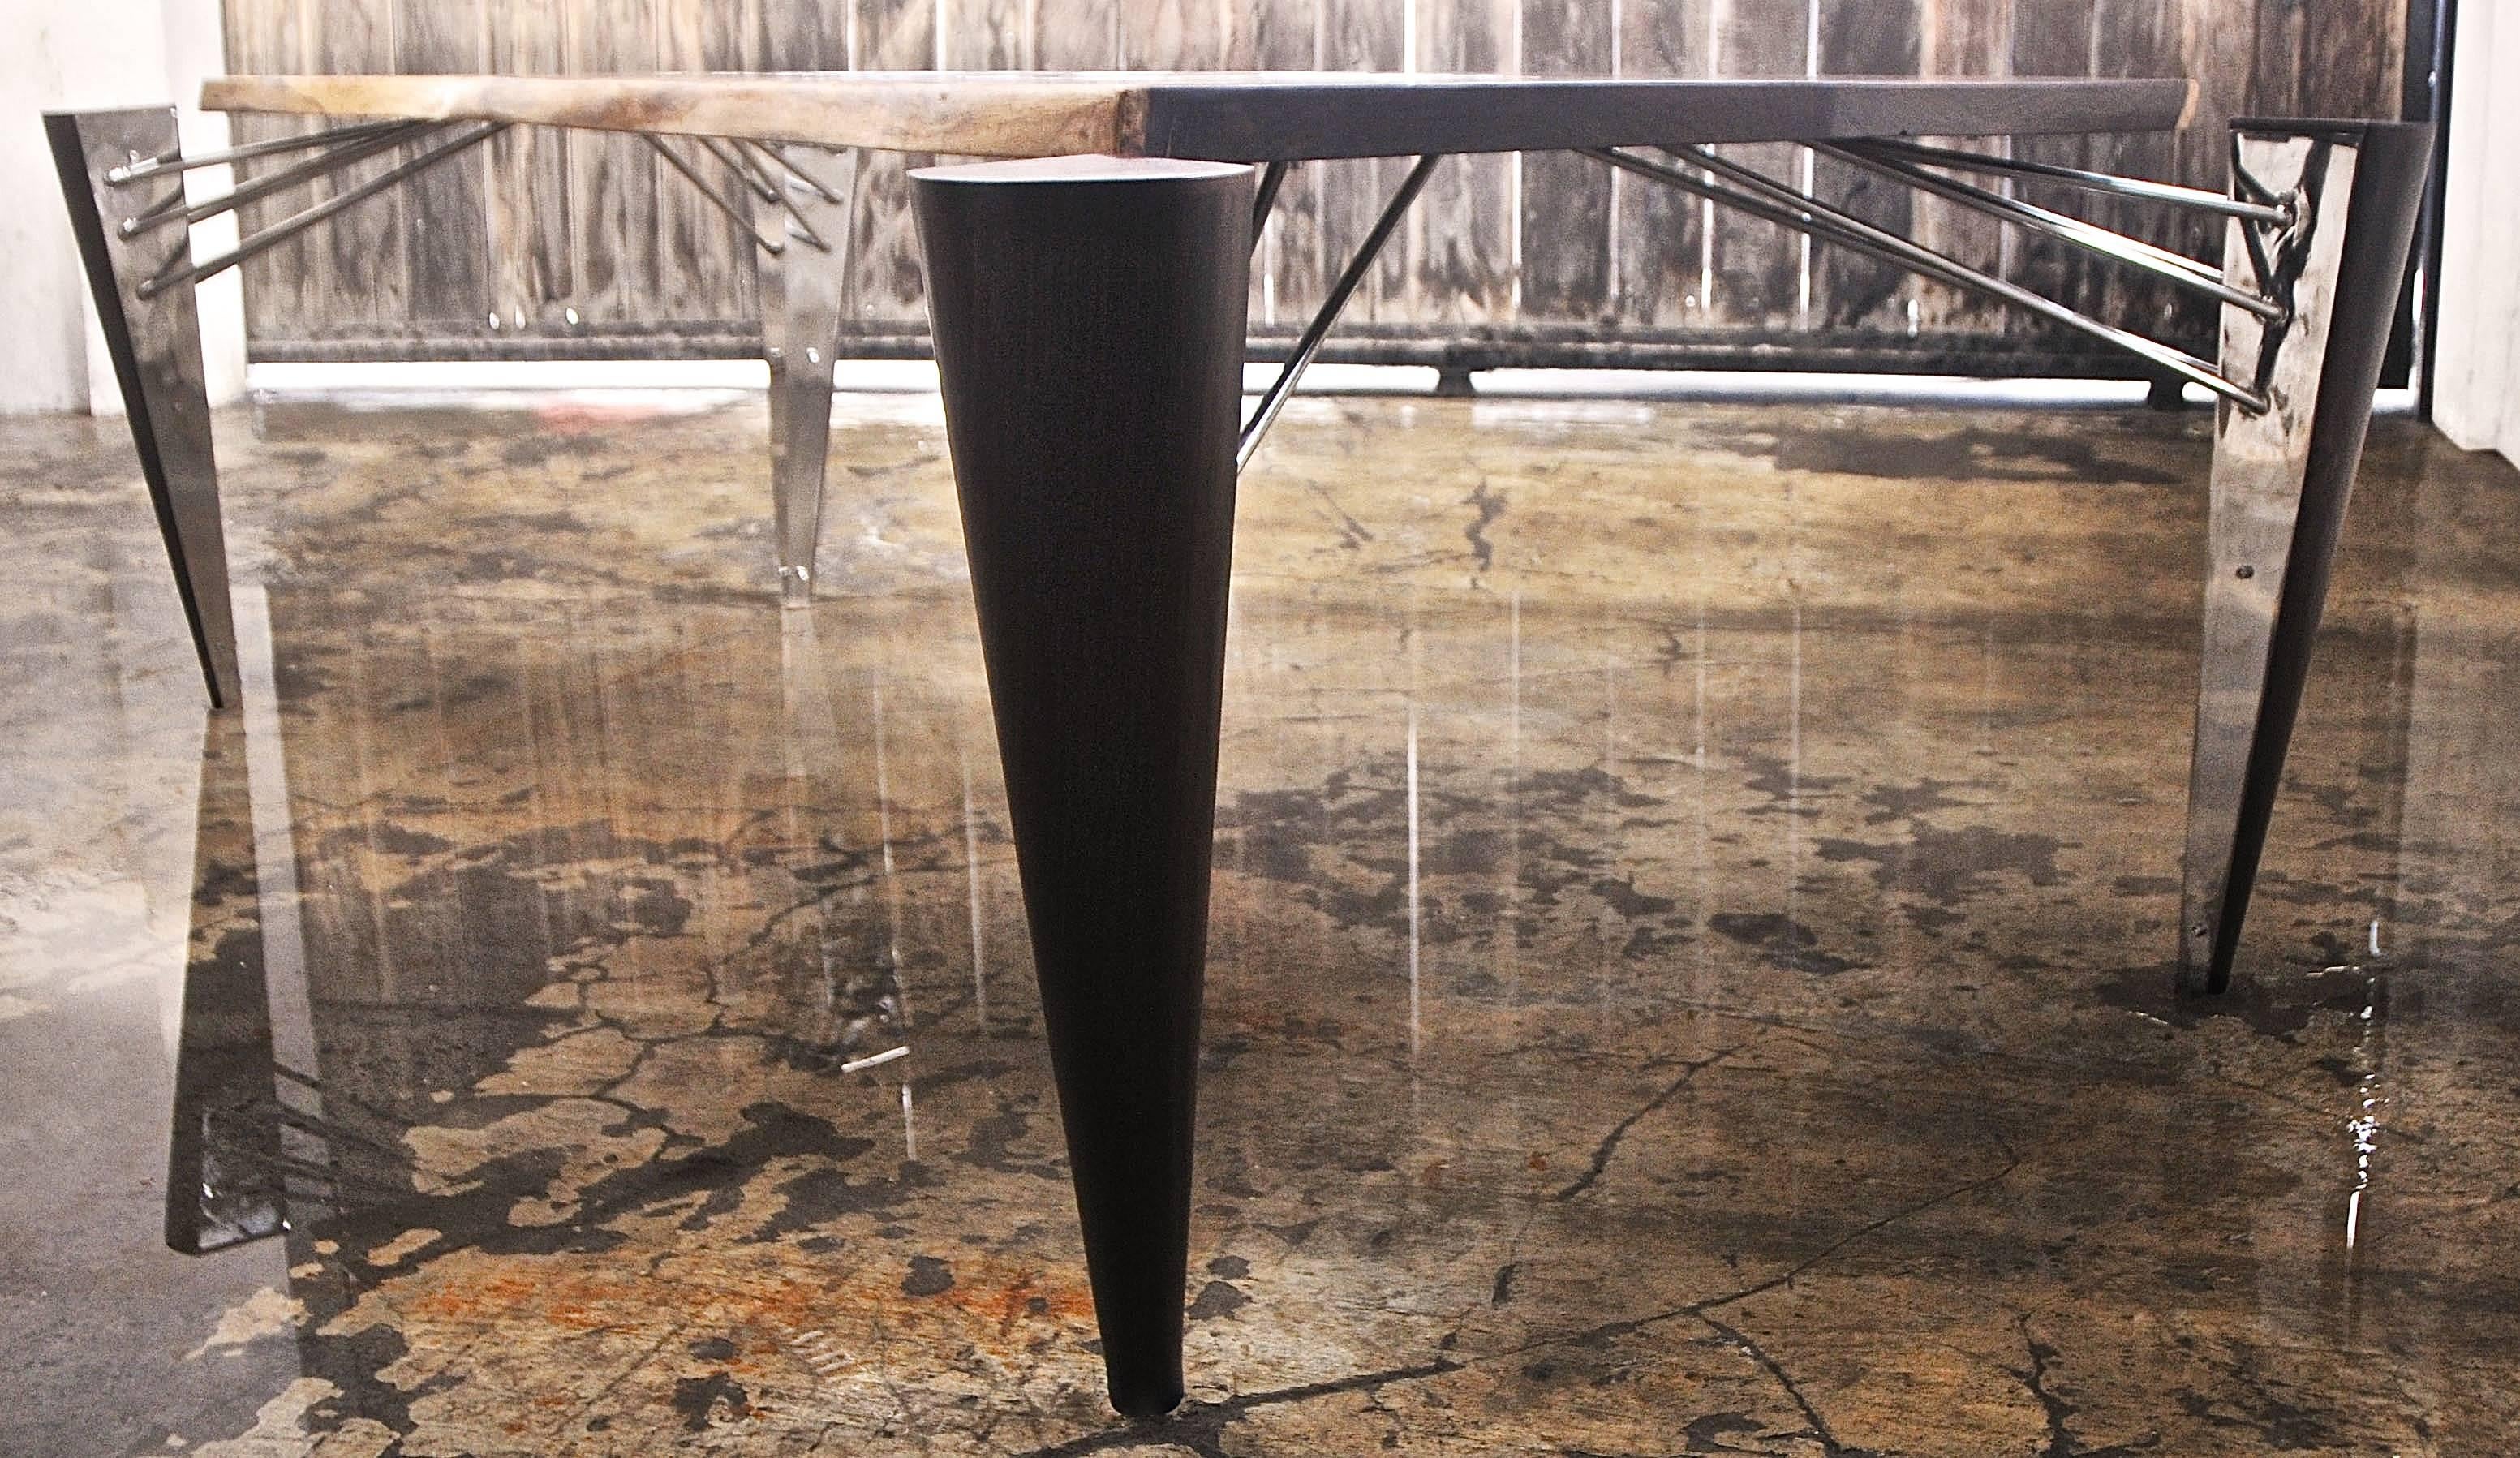 Rocket table
designed by Bruno Helgen and manufactured in his workshop in Bali.
Signed: Helgen Design/Stamped: R/2015.
Time process: June to August 2015.
Feet: Stainless steel 304 5 mm/finishing: Mirror polished.
Top: Rosewood from East Java